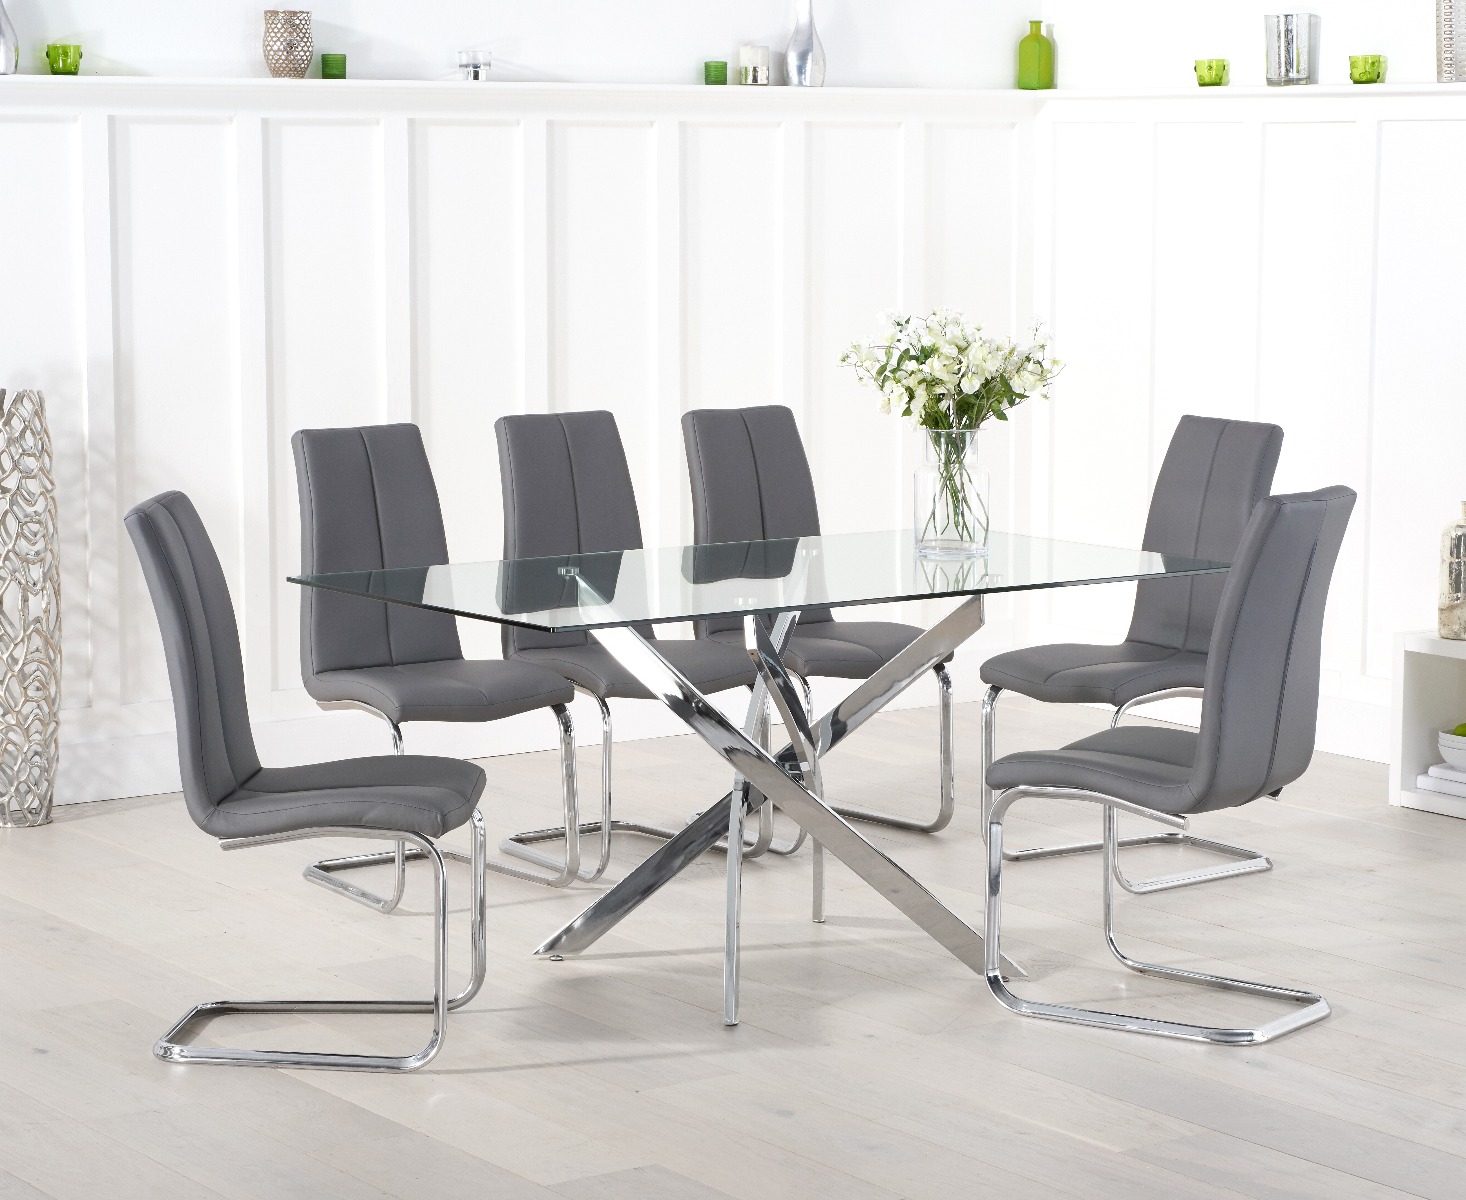 Denver 160cm Glass Dining Table With 4 Grey Tarin Chairs